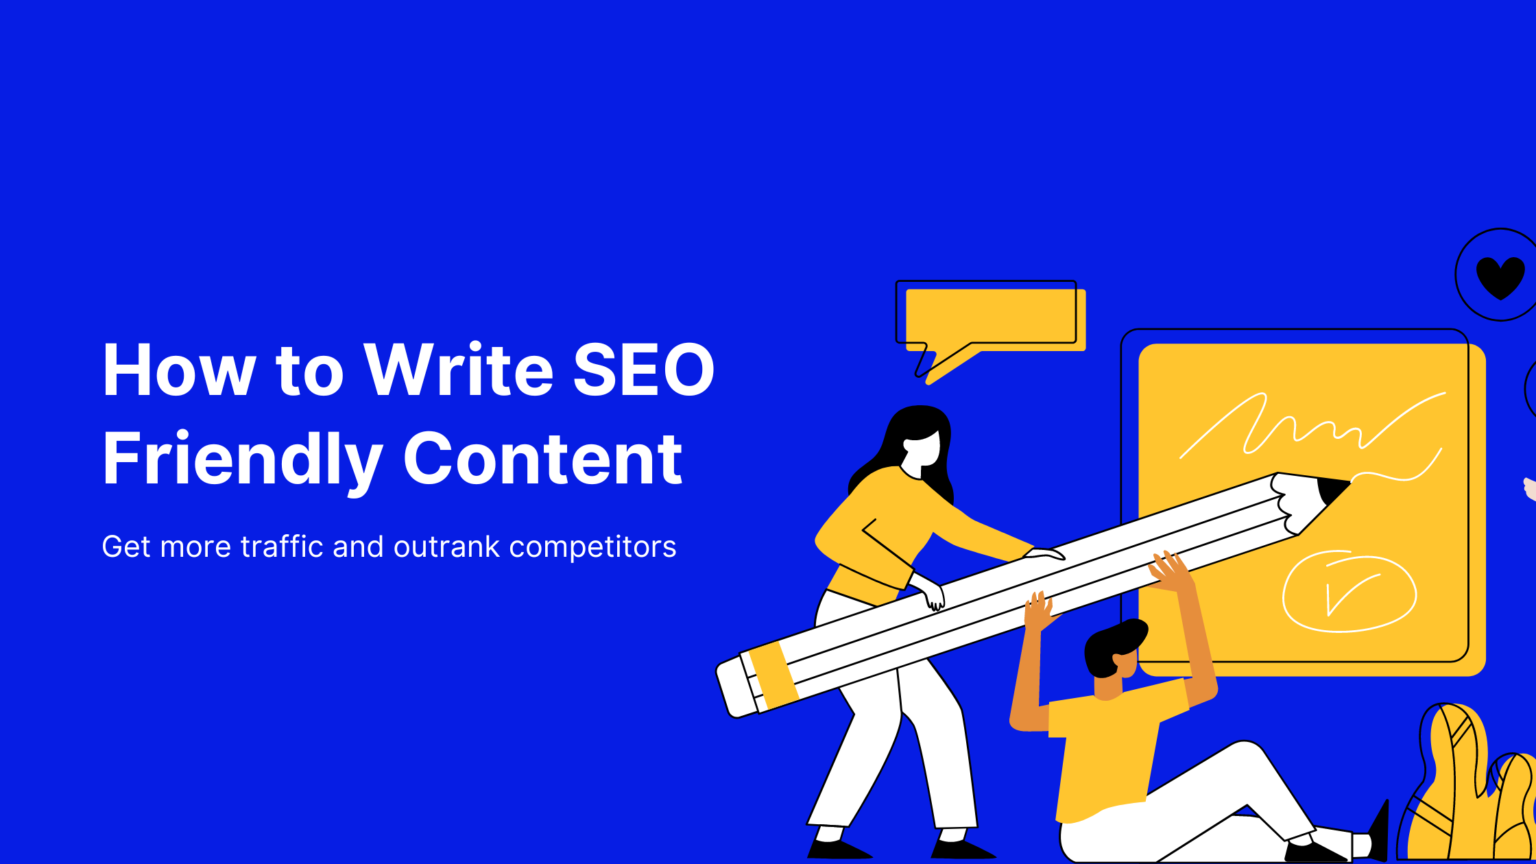 How to Write SEO Friendly Content